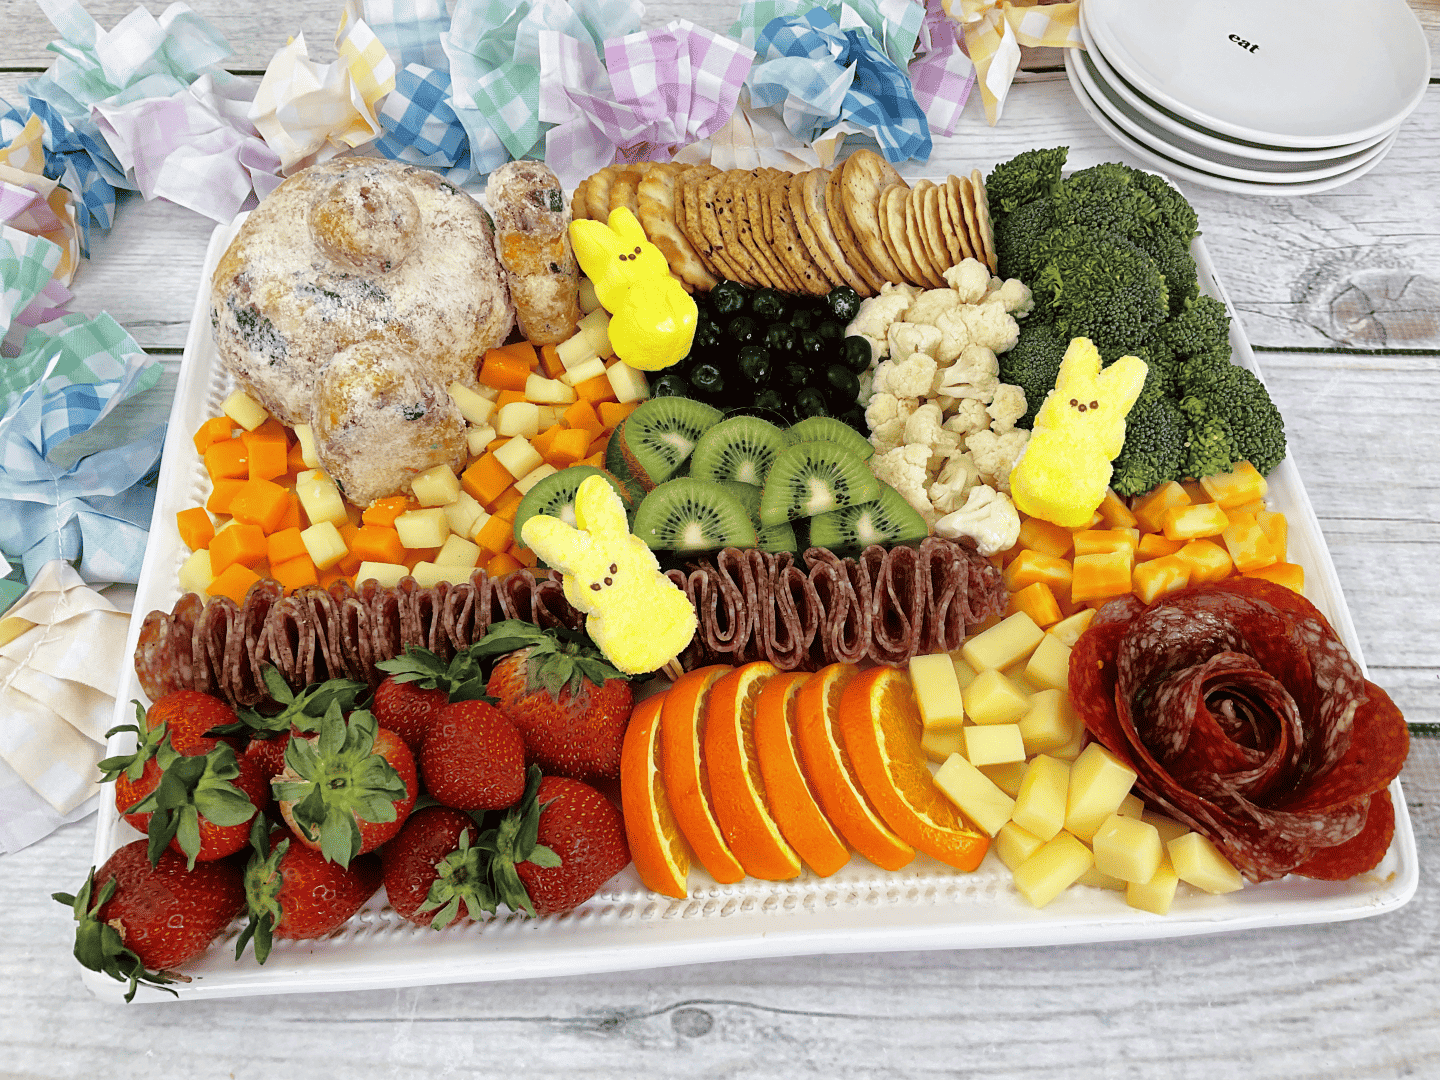 Bunny Butt Cheeseball & Charcuterie Board: completed board with meats, fruit, vegetables, and cheese. 